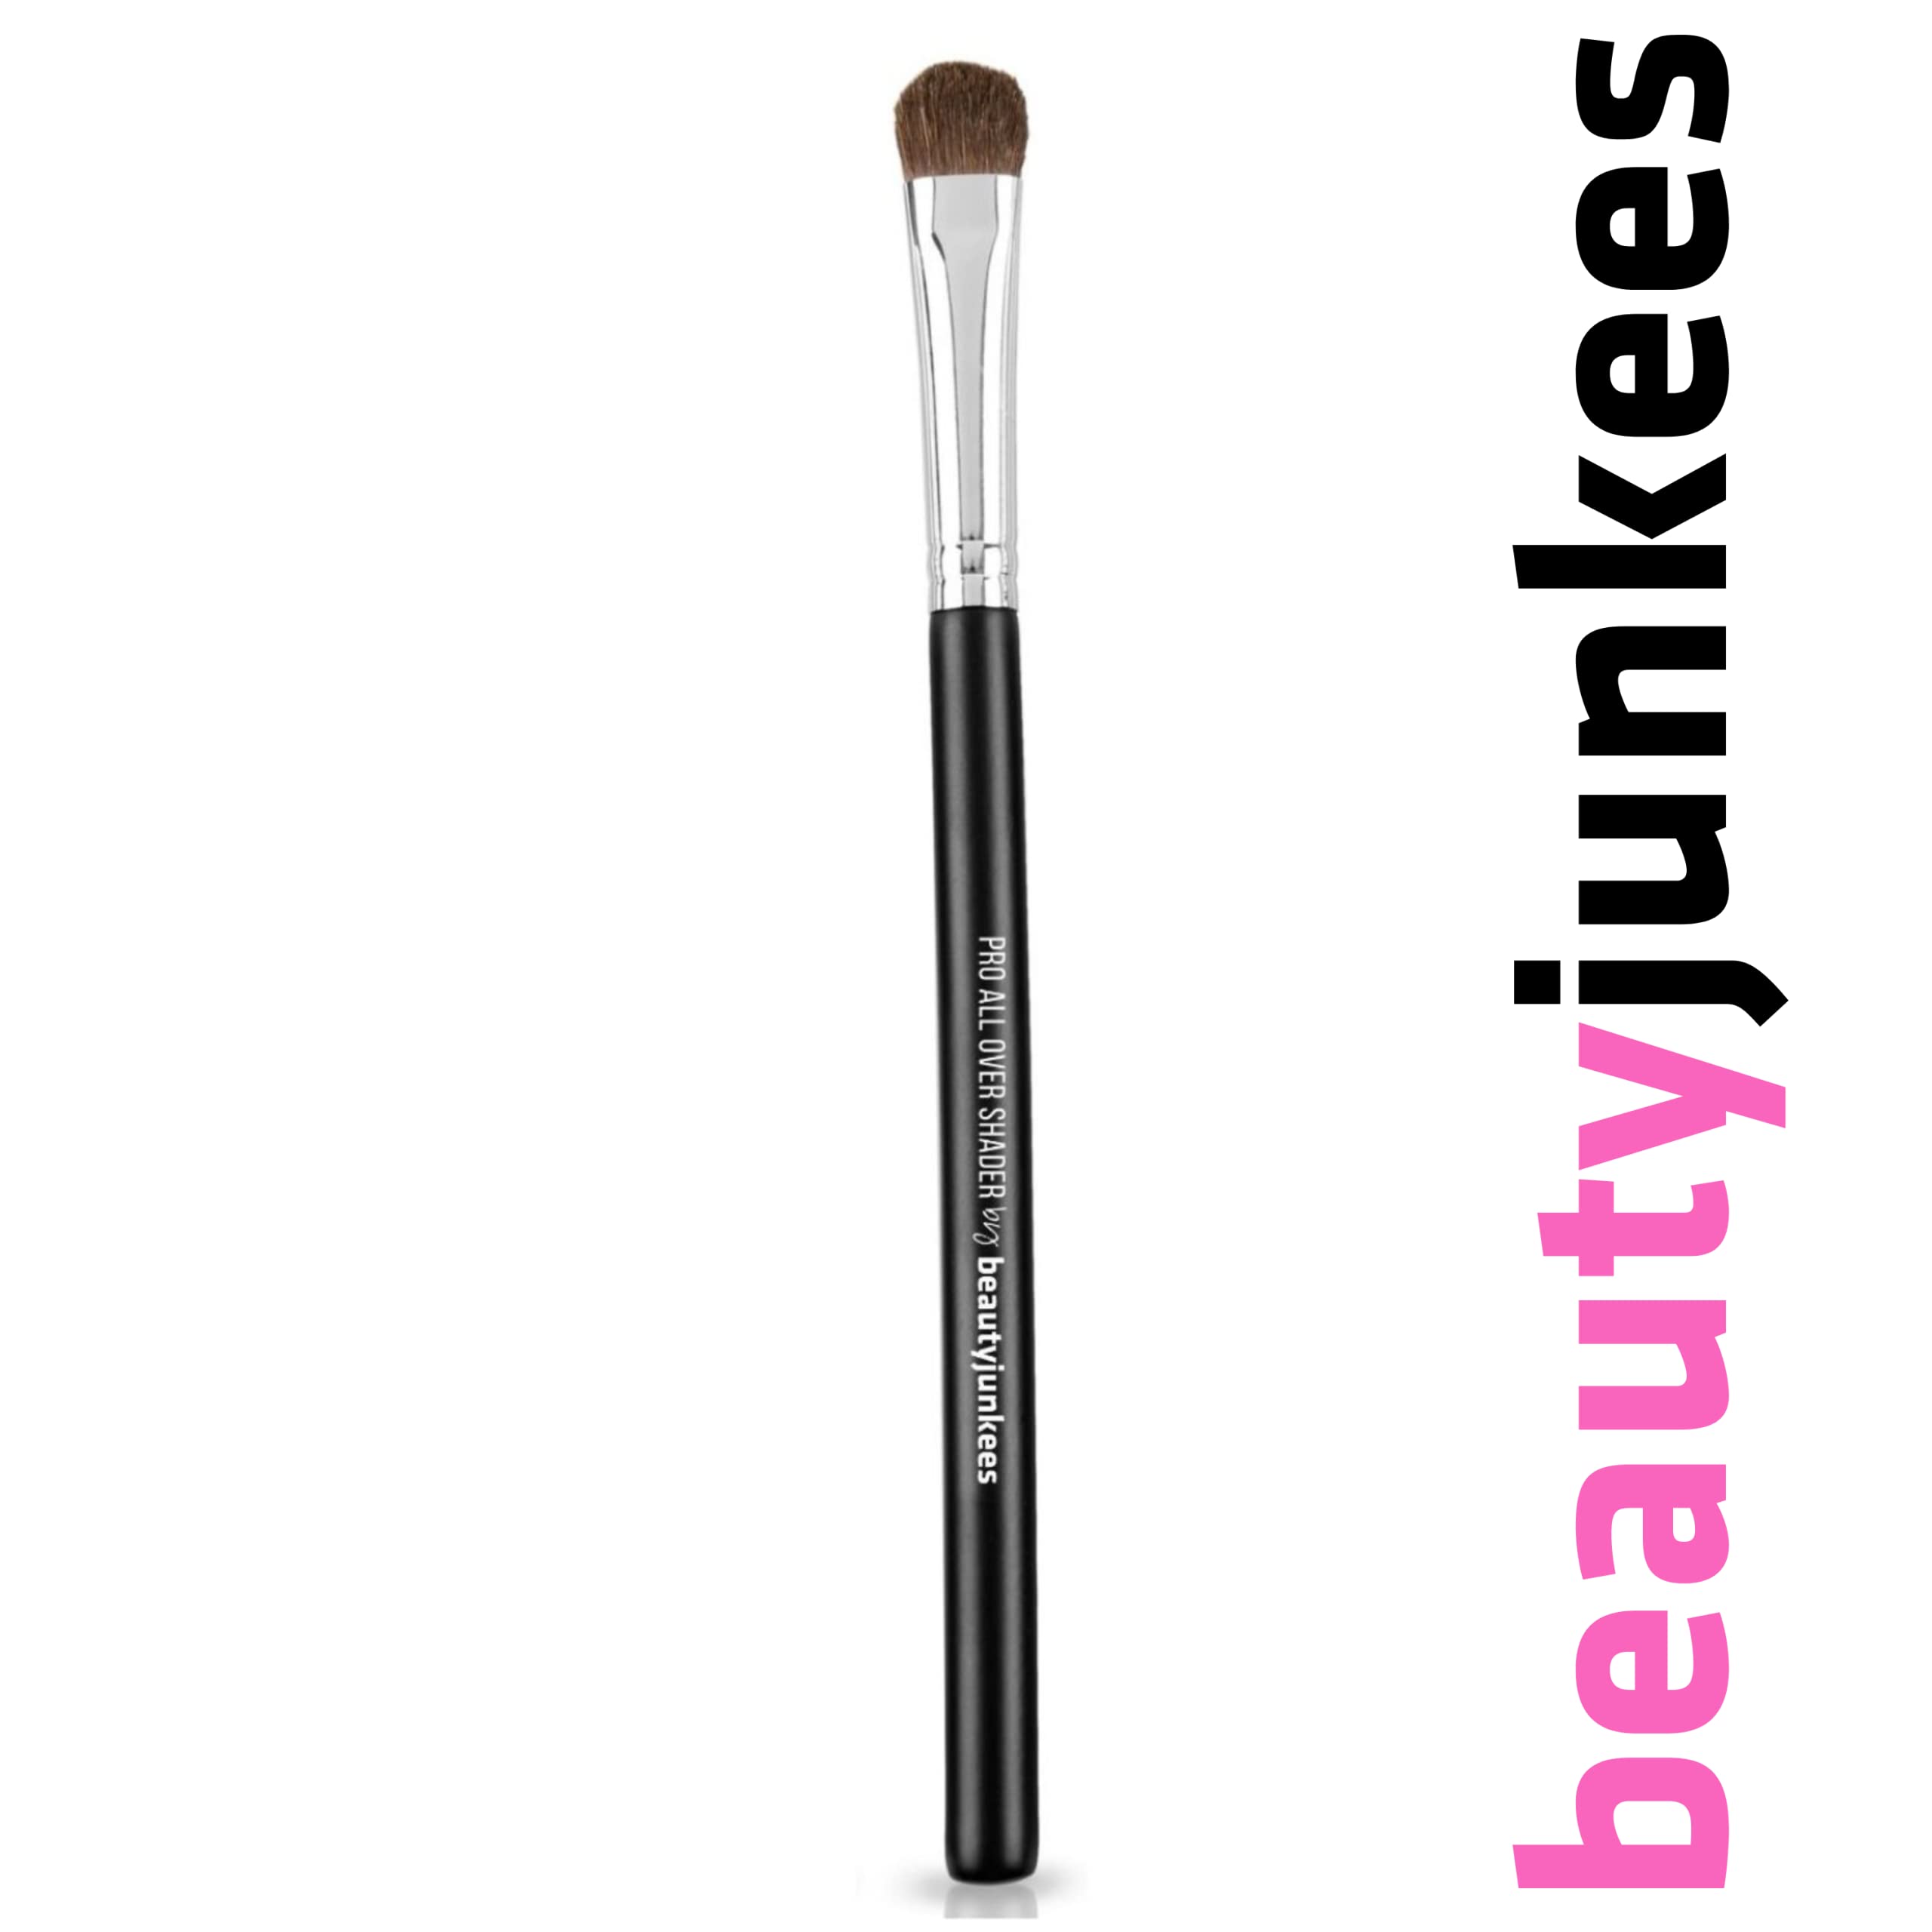 Pro Shader Eyeshadow Brush - Beauty Junkees pro All Over Short Flat Shader Eye Shadow Brush for Lid, Dense Rounded Bristles to Pack and Blend Powder Cream Eye Shadow on Eyelid and Crease